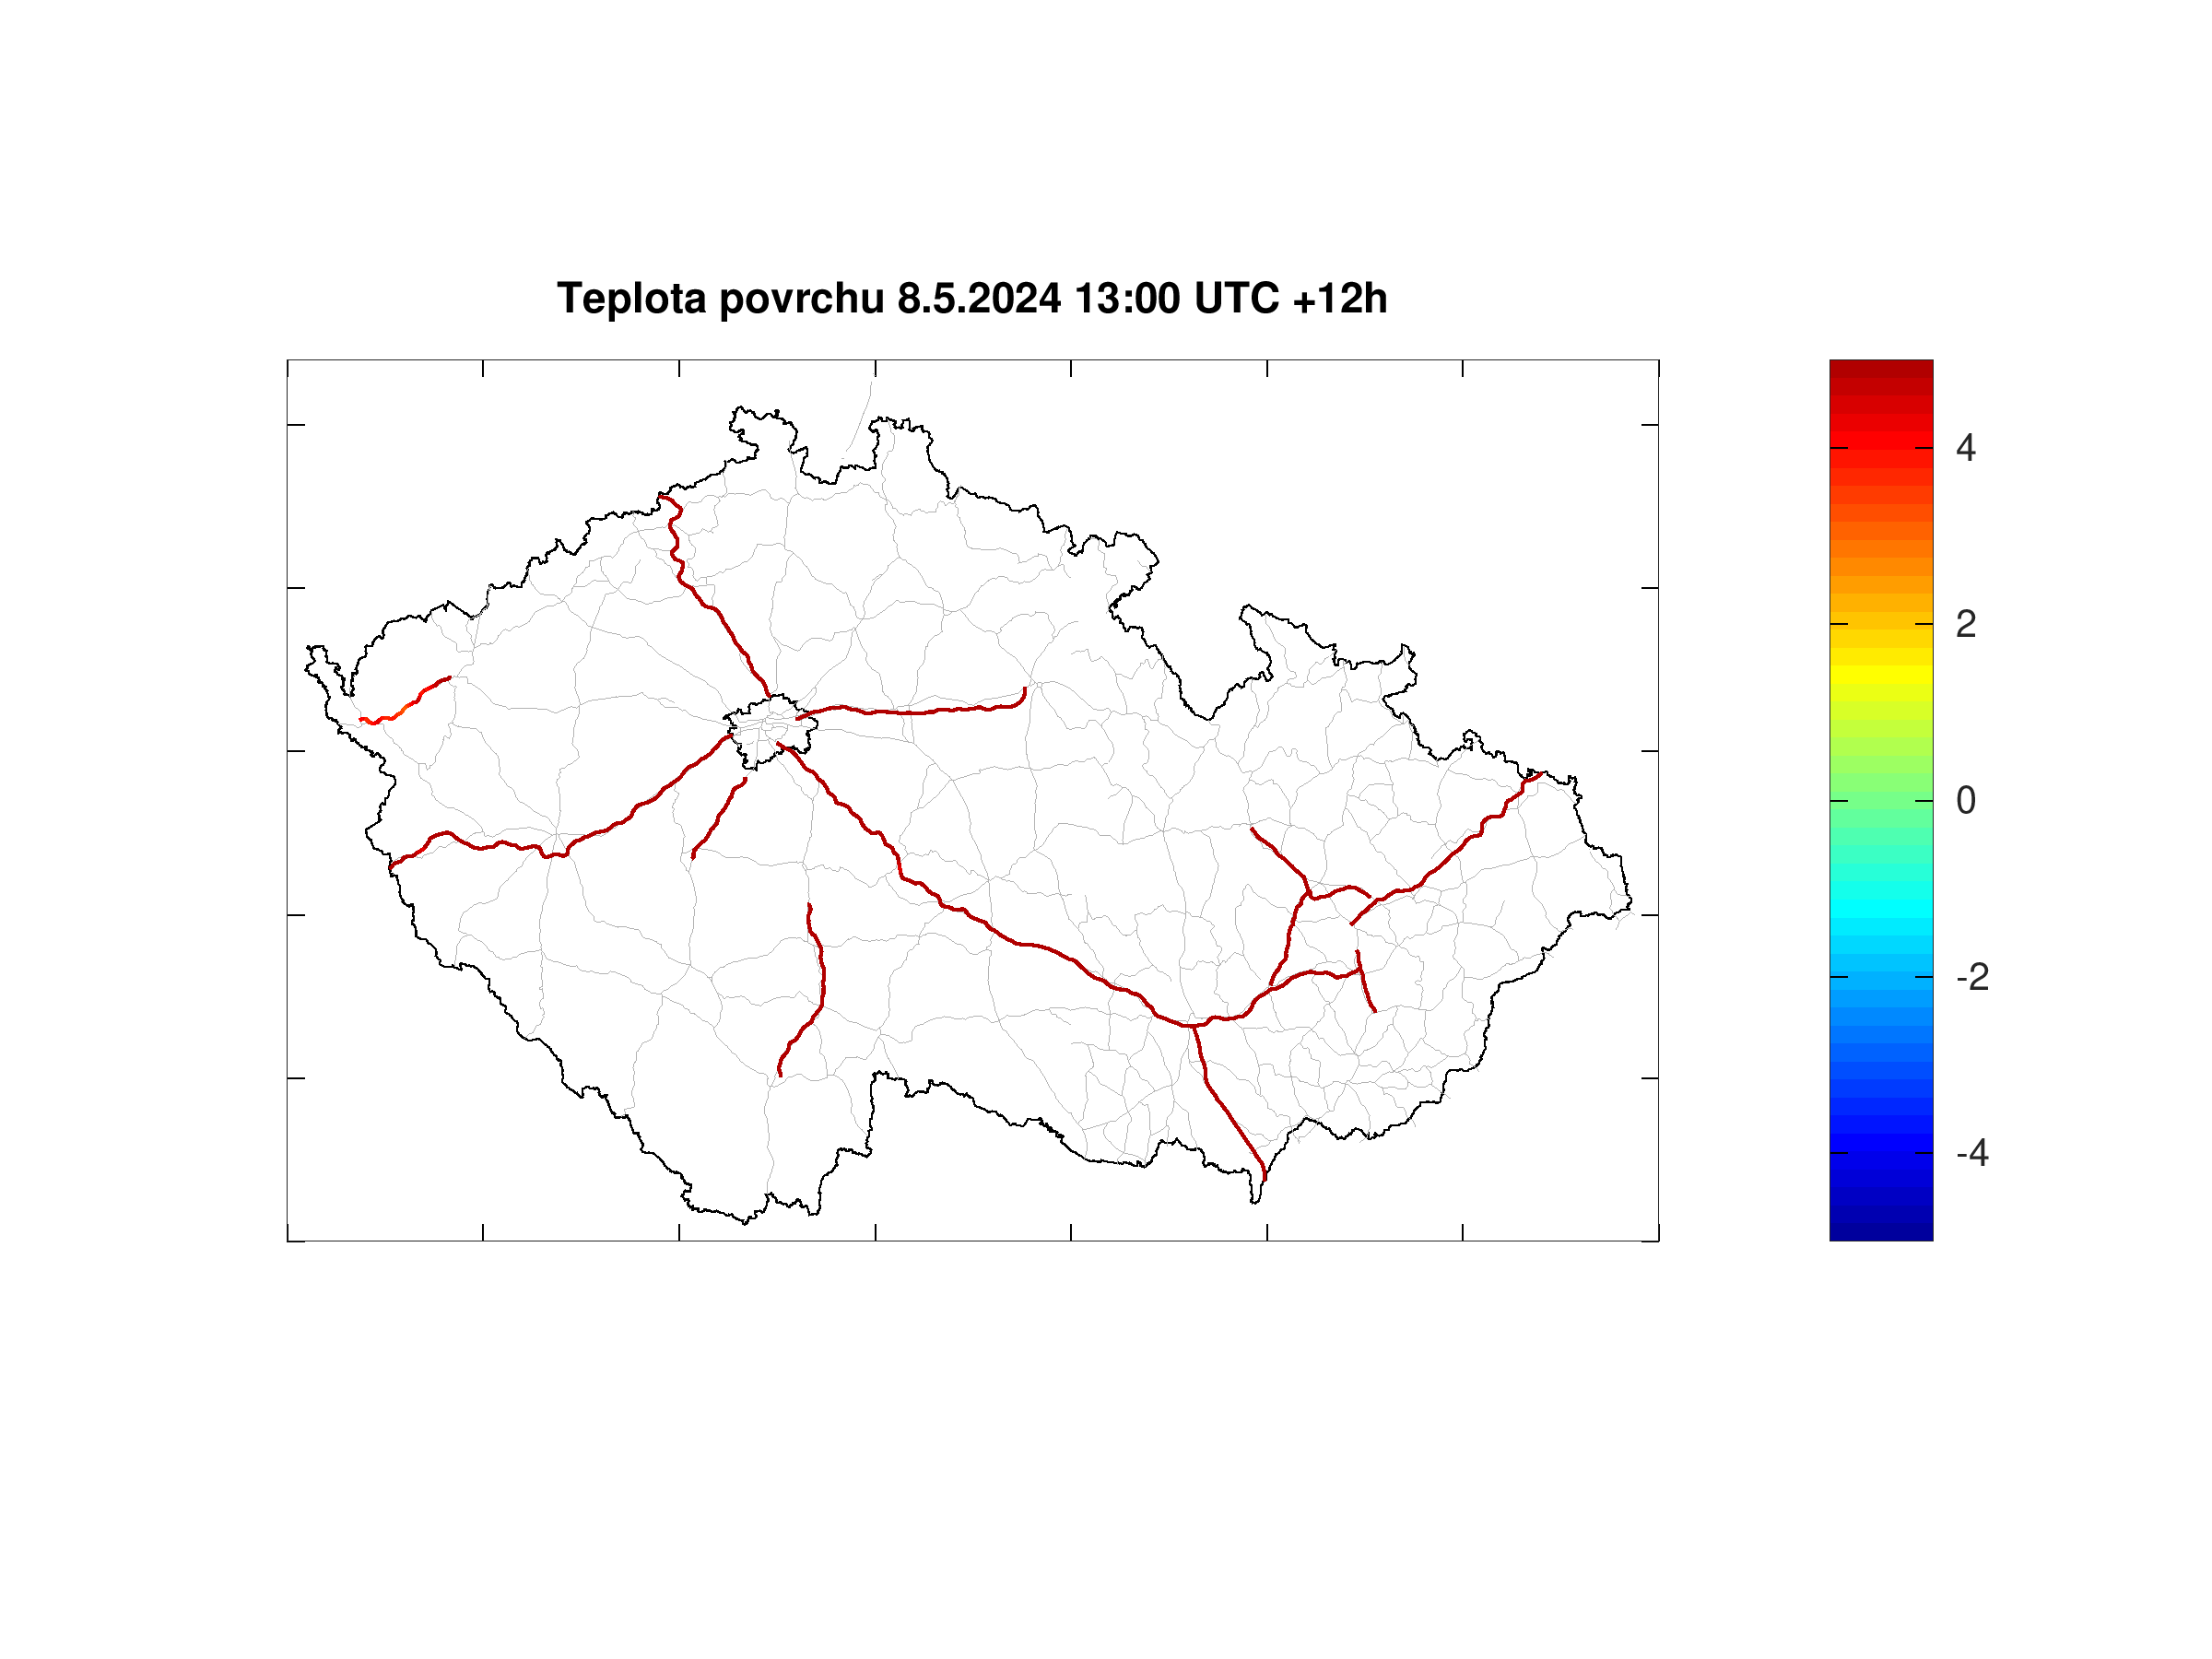 Road surface teperature forecast for Czech highways +12h